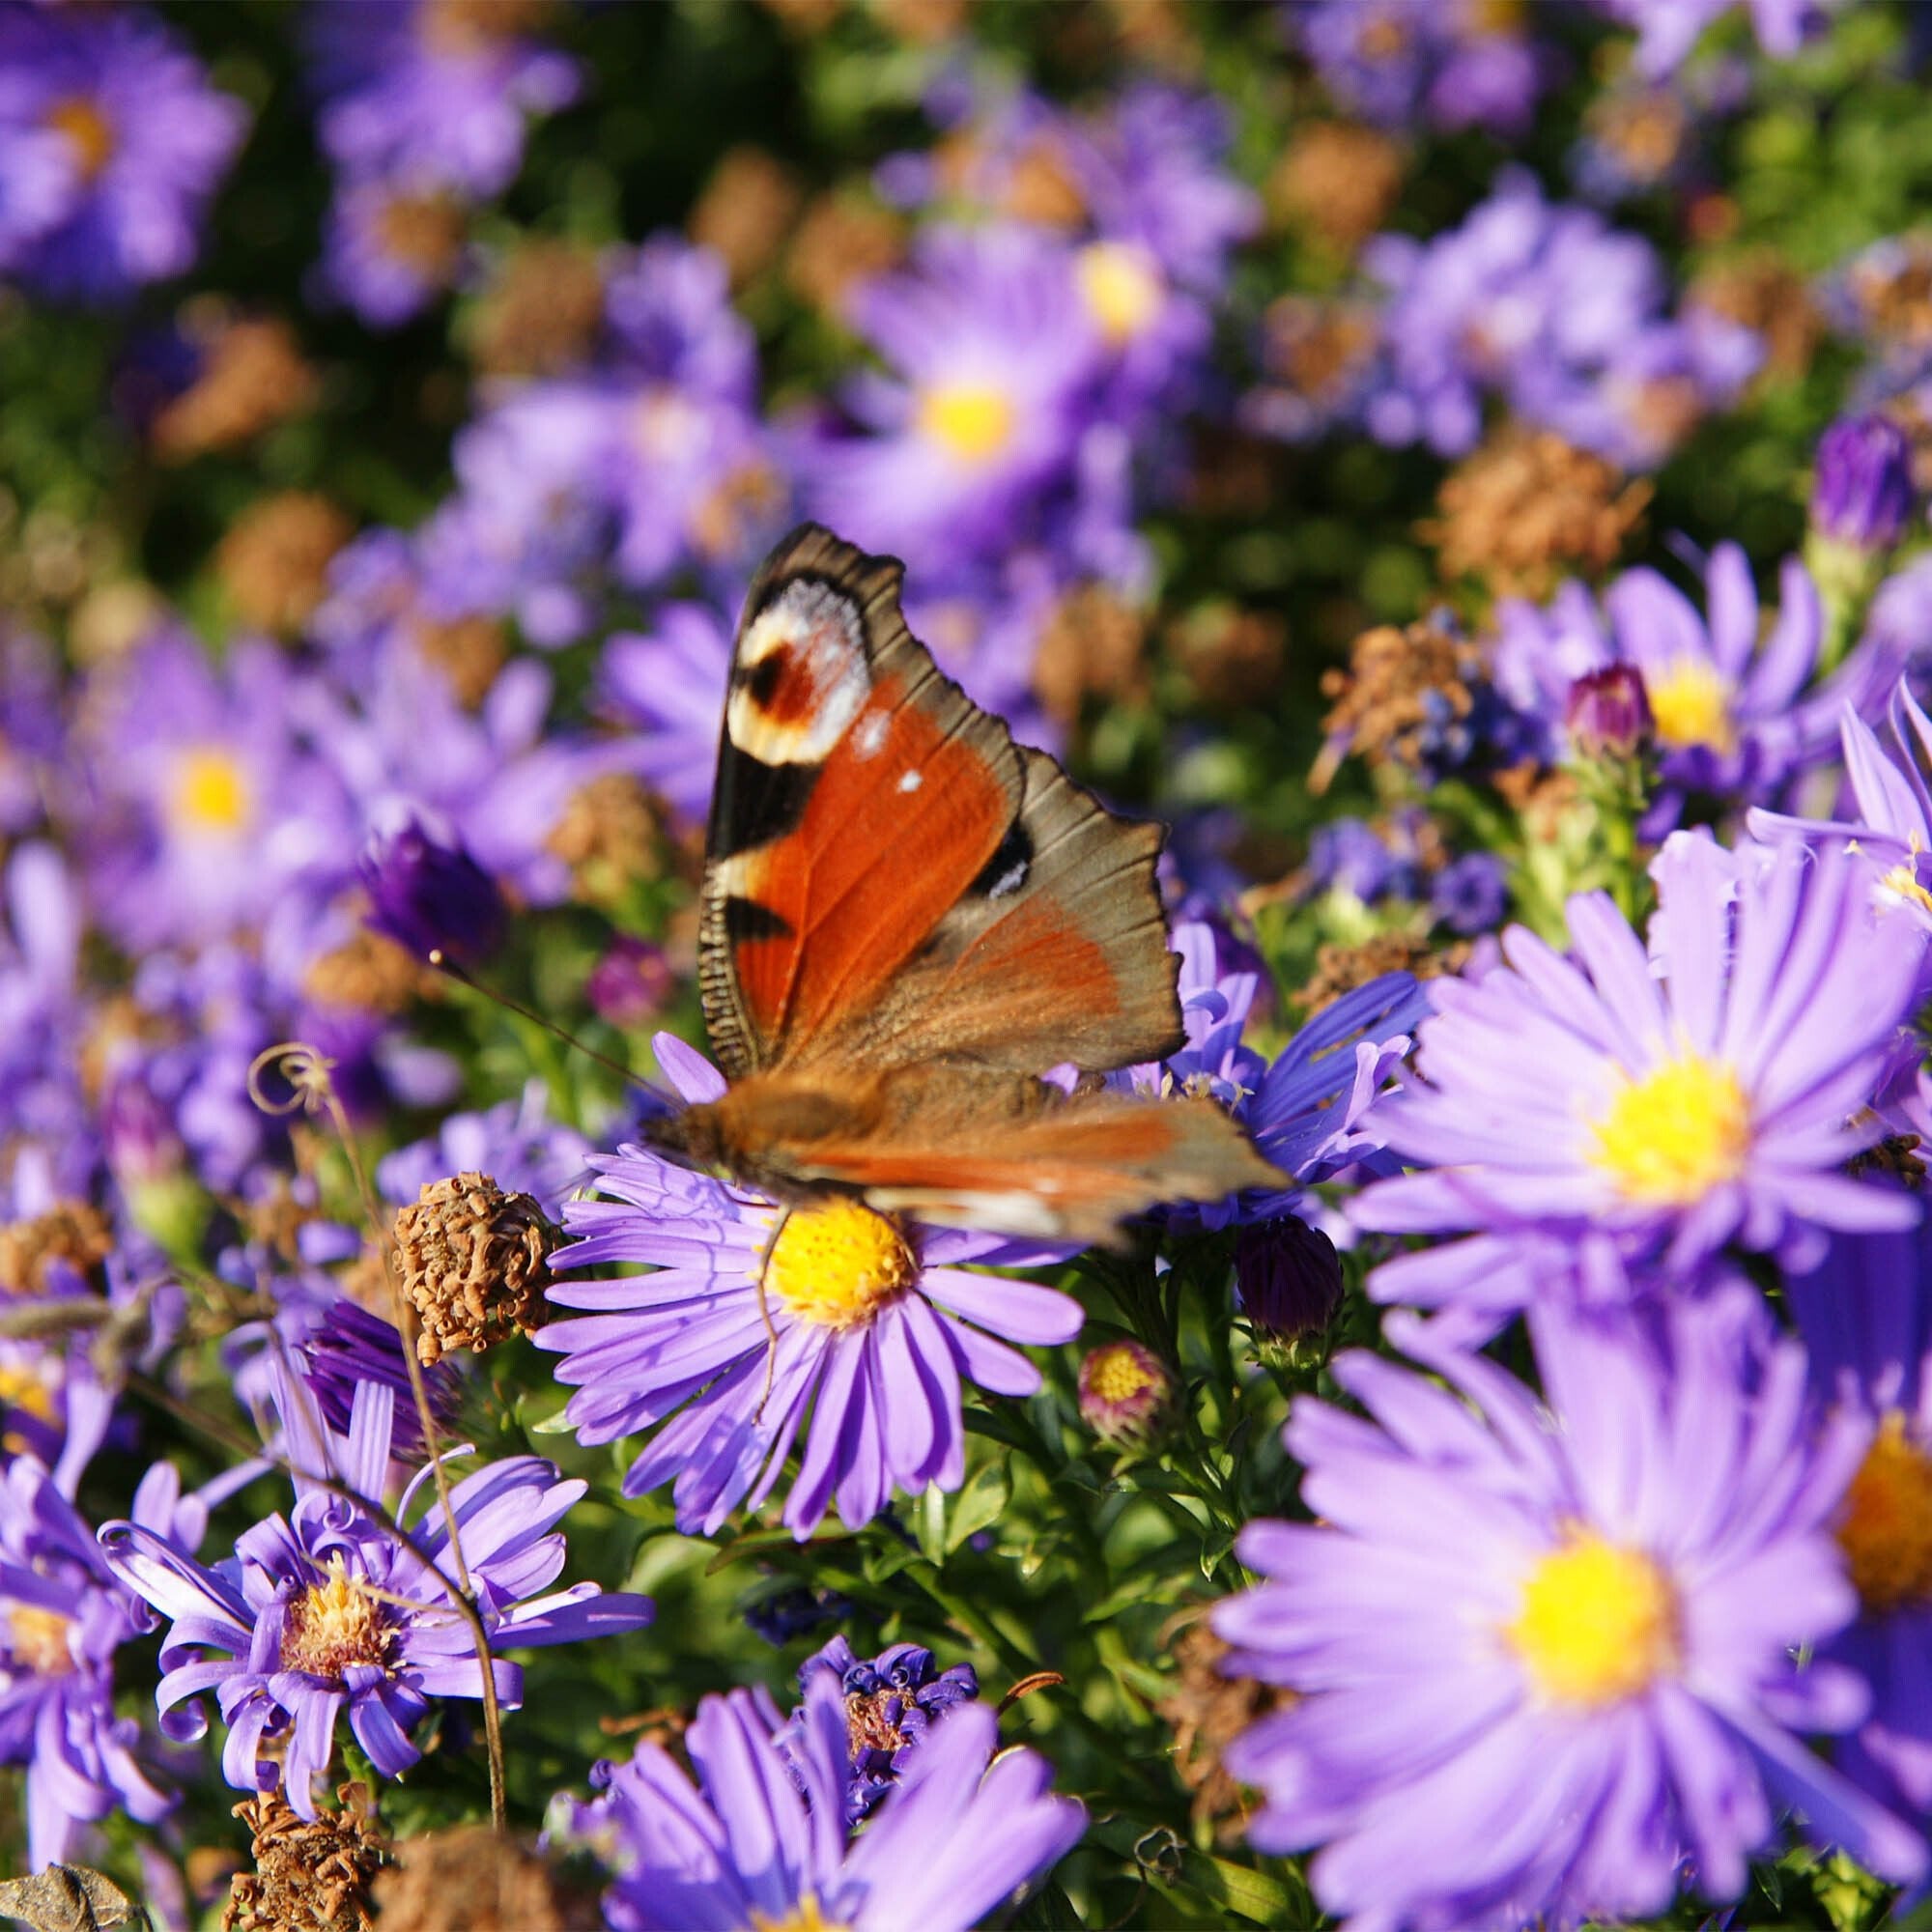 Plant Flowers to Save Bees & Other Natural Wildlife